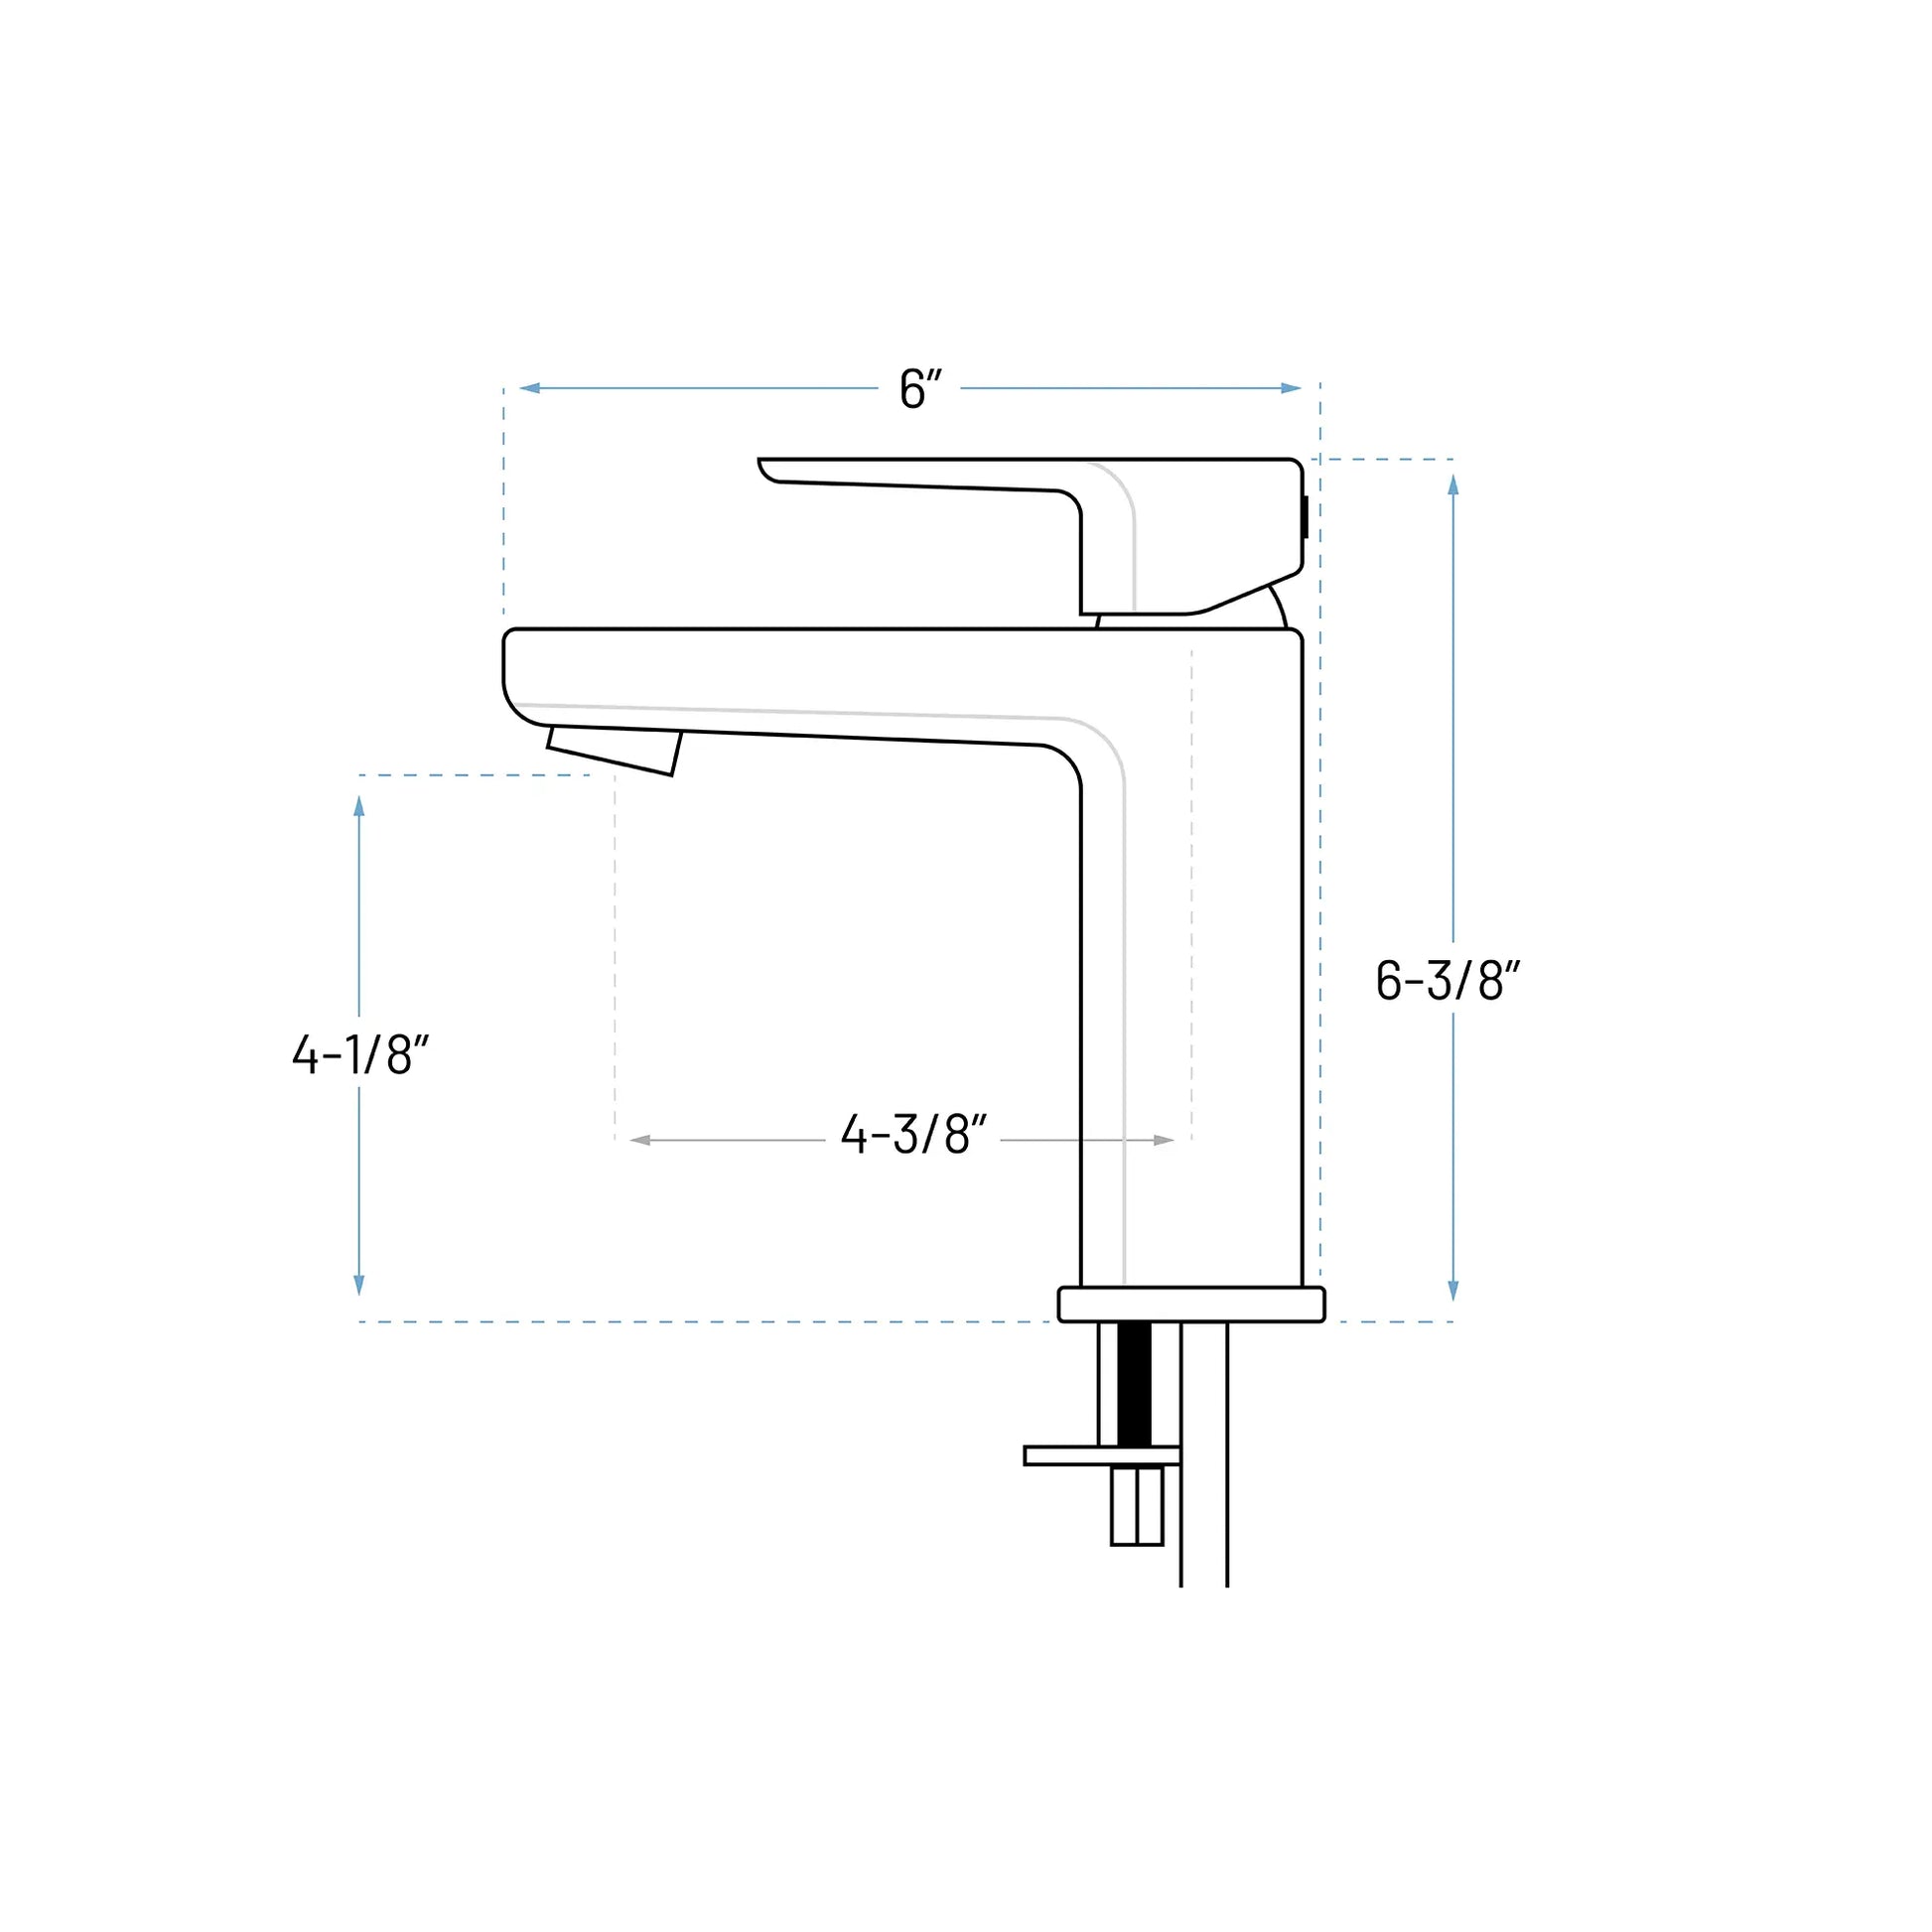 Technical Drawing of a single handle bathroom faucet